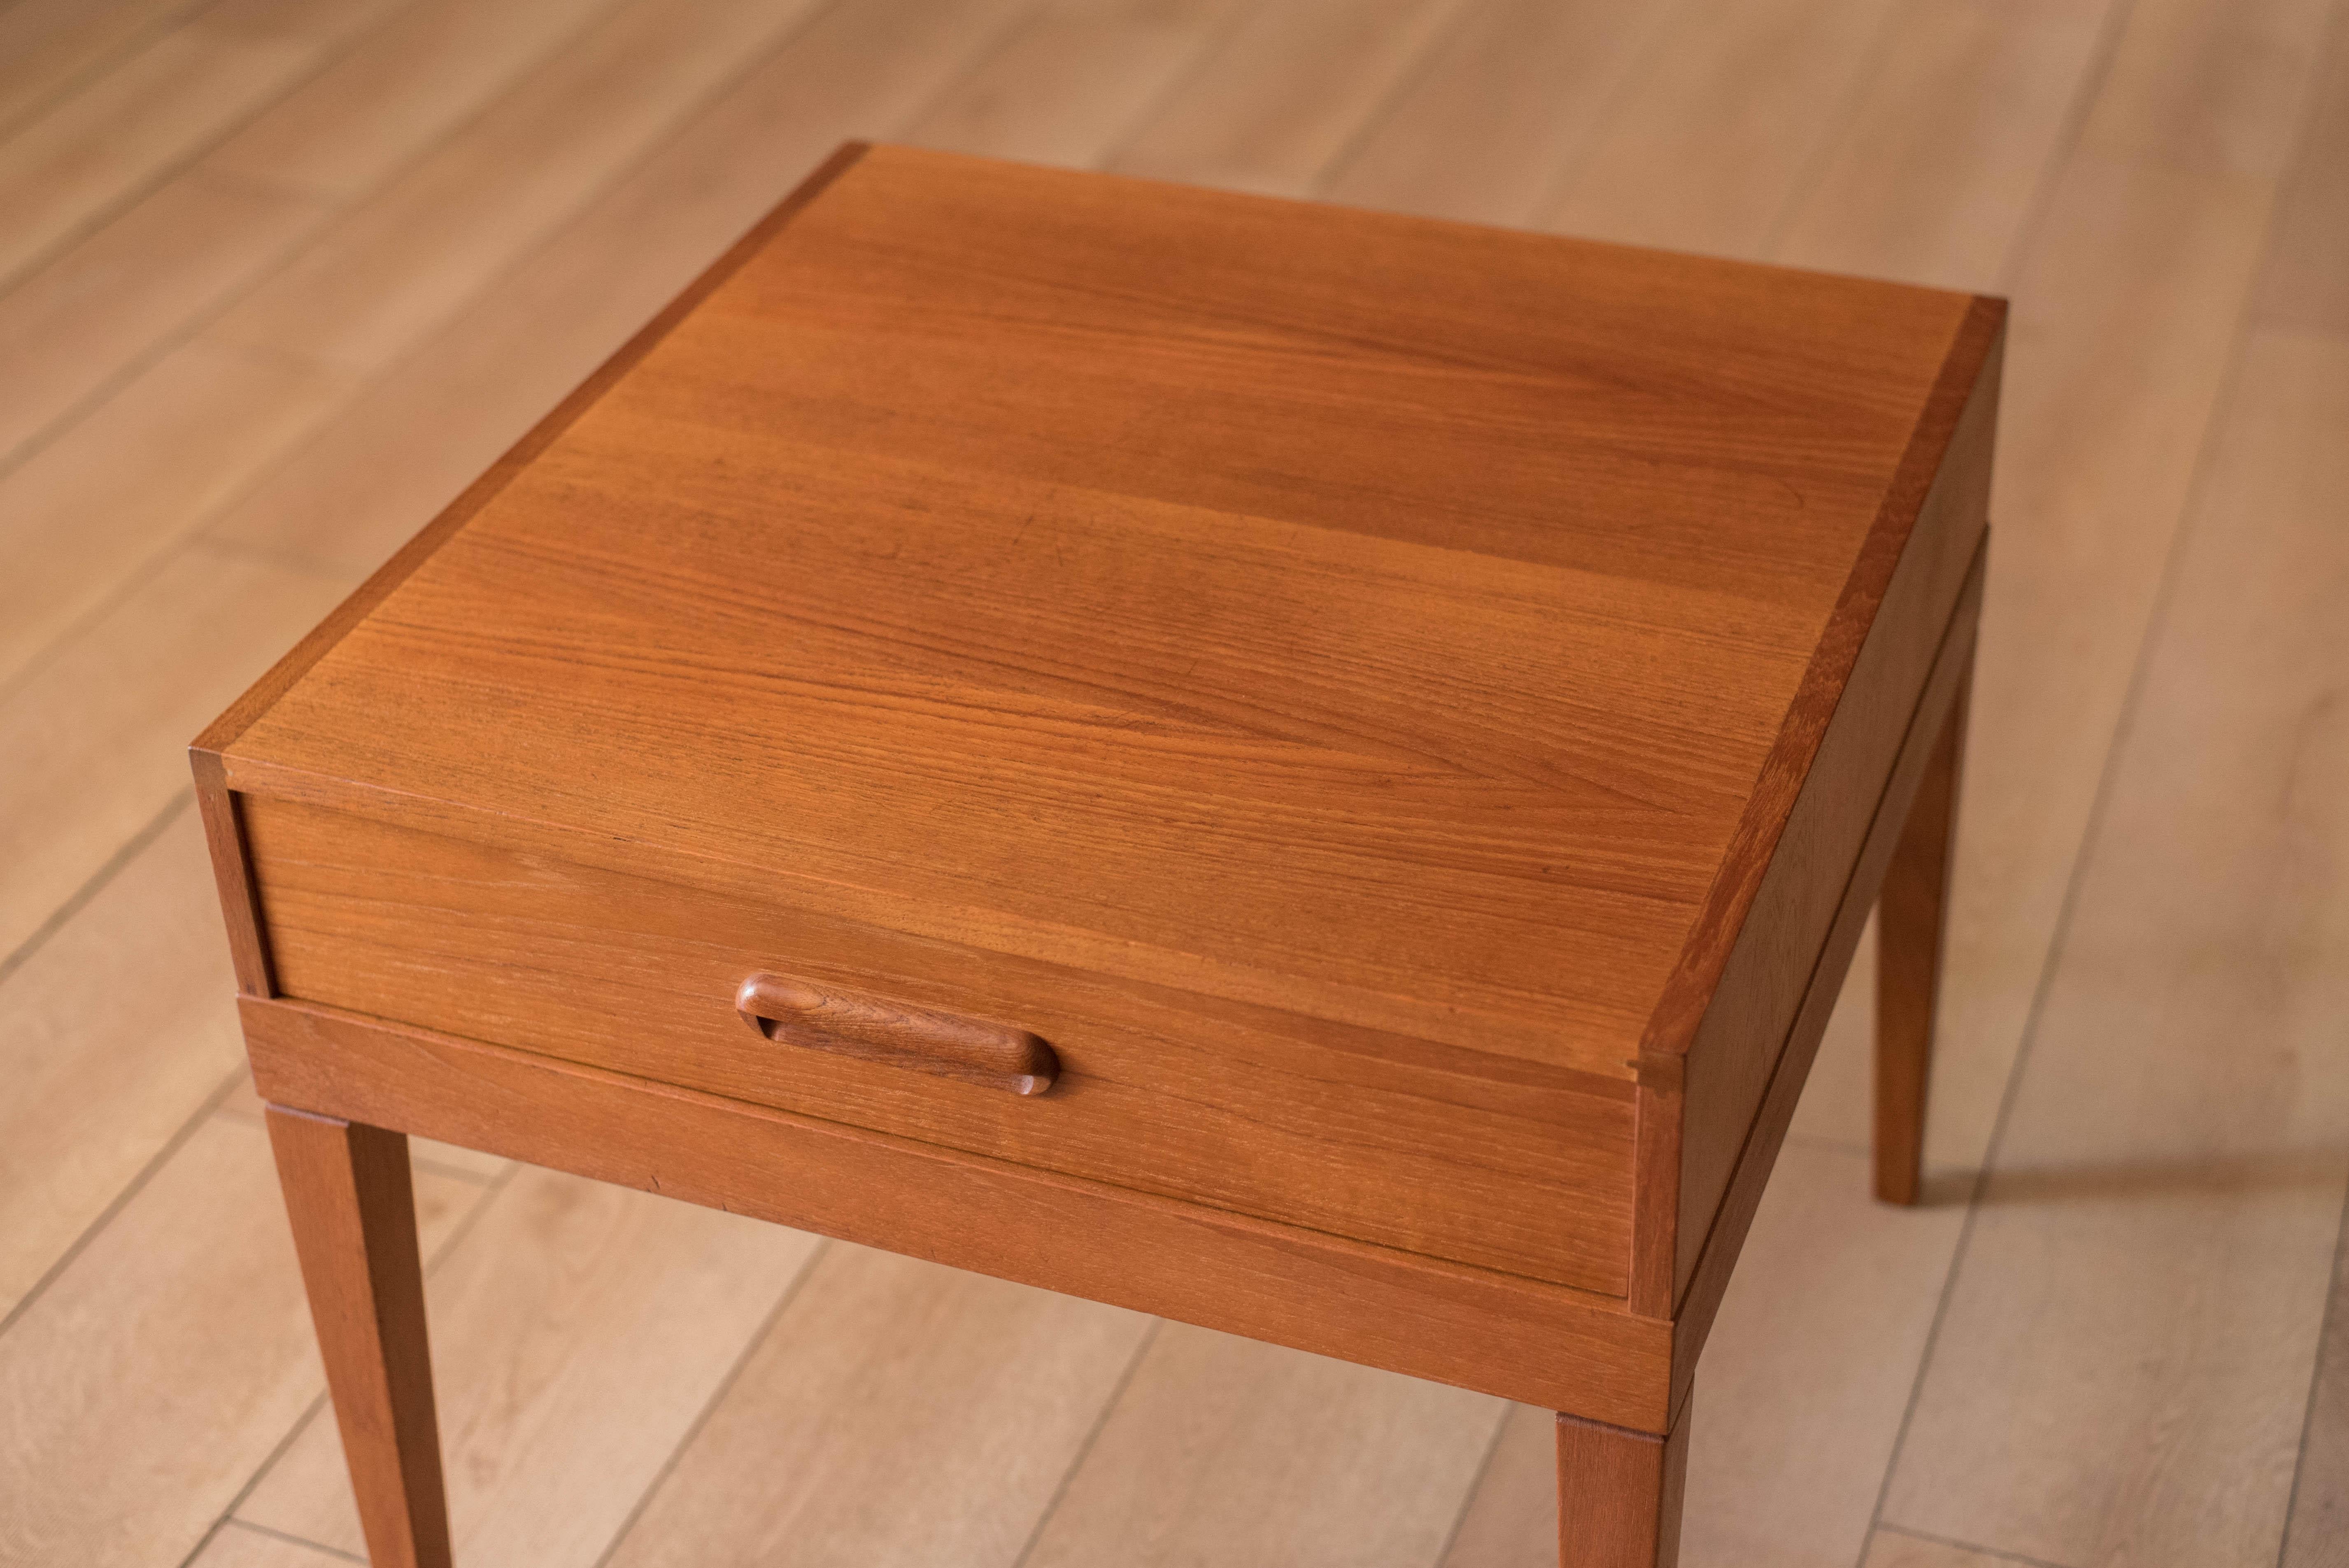 Mid-20th Century Mid Century Modern Teak Accent Square End Table with Storage Drawer